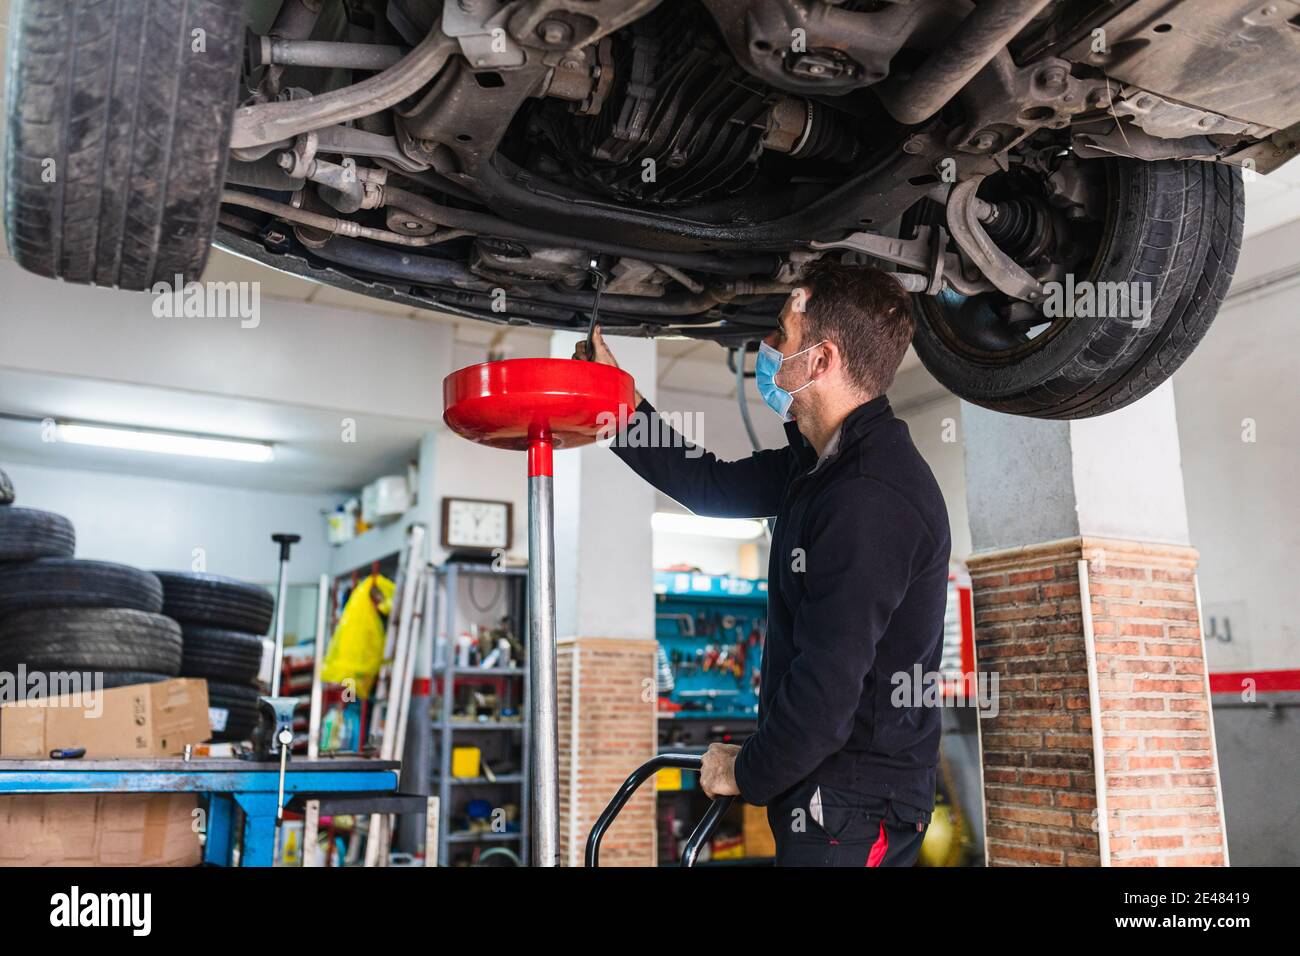 Mechanic with mask changing the oil of the car. Stock Photo